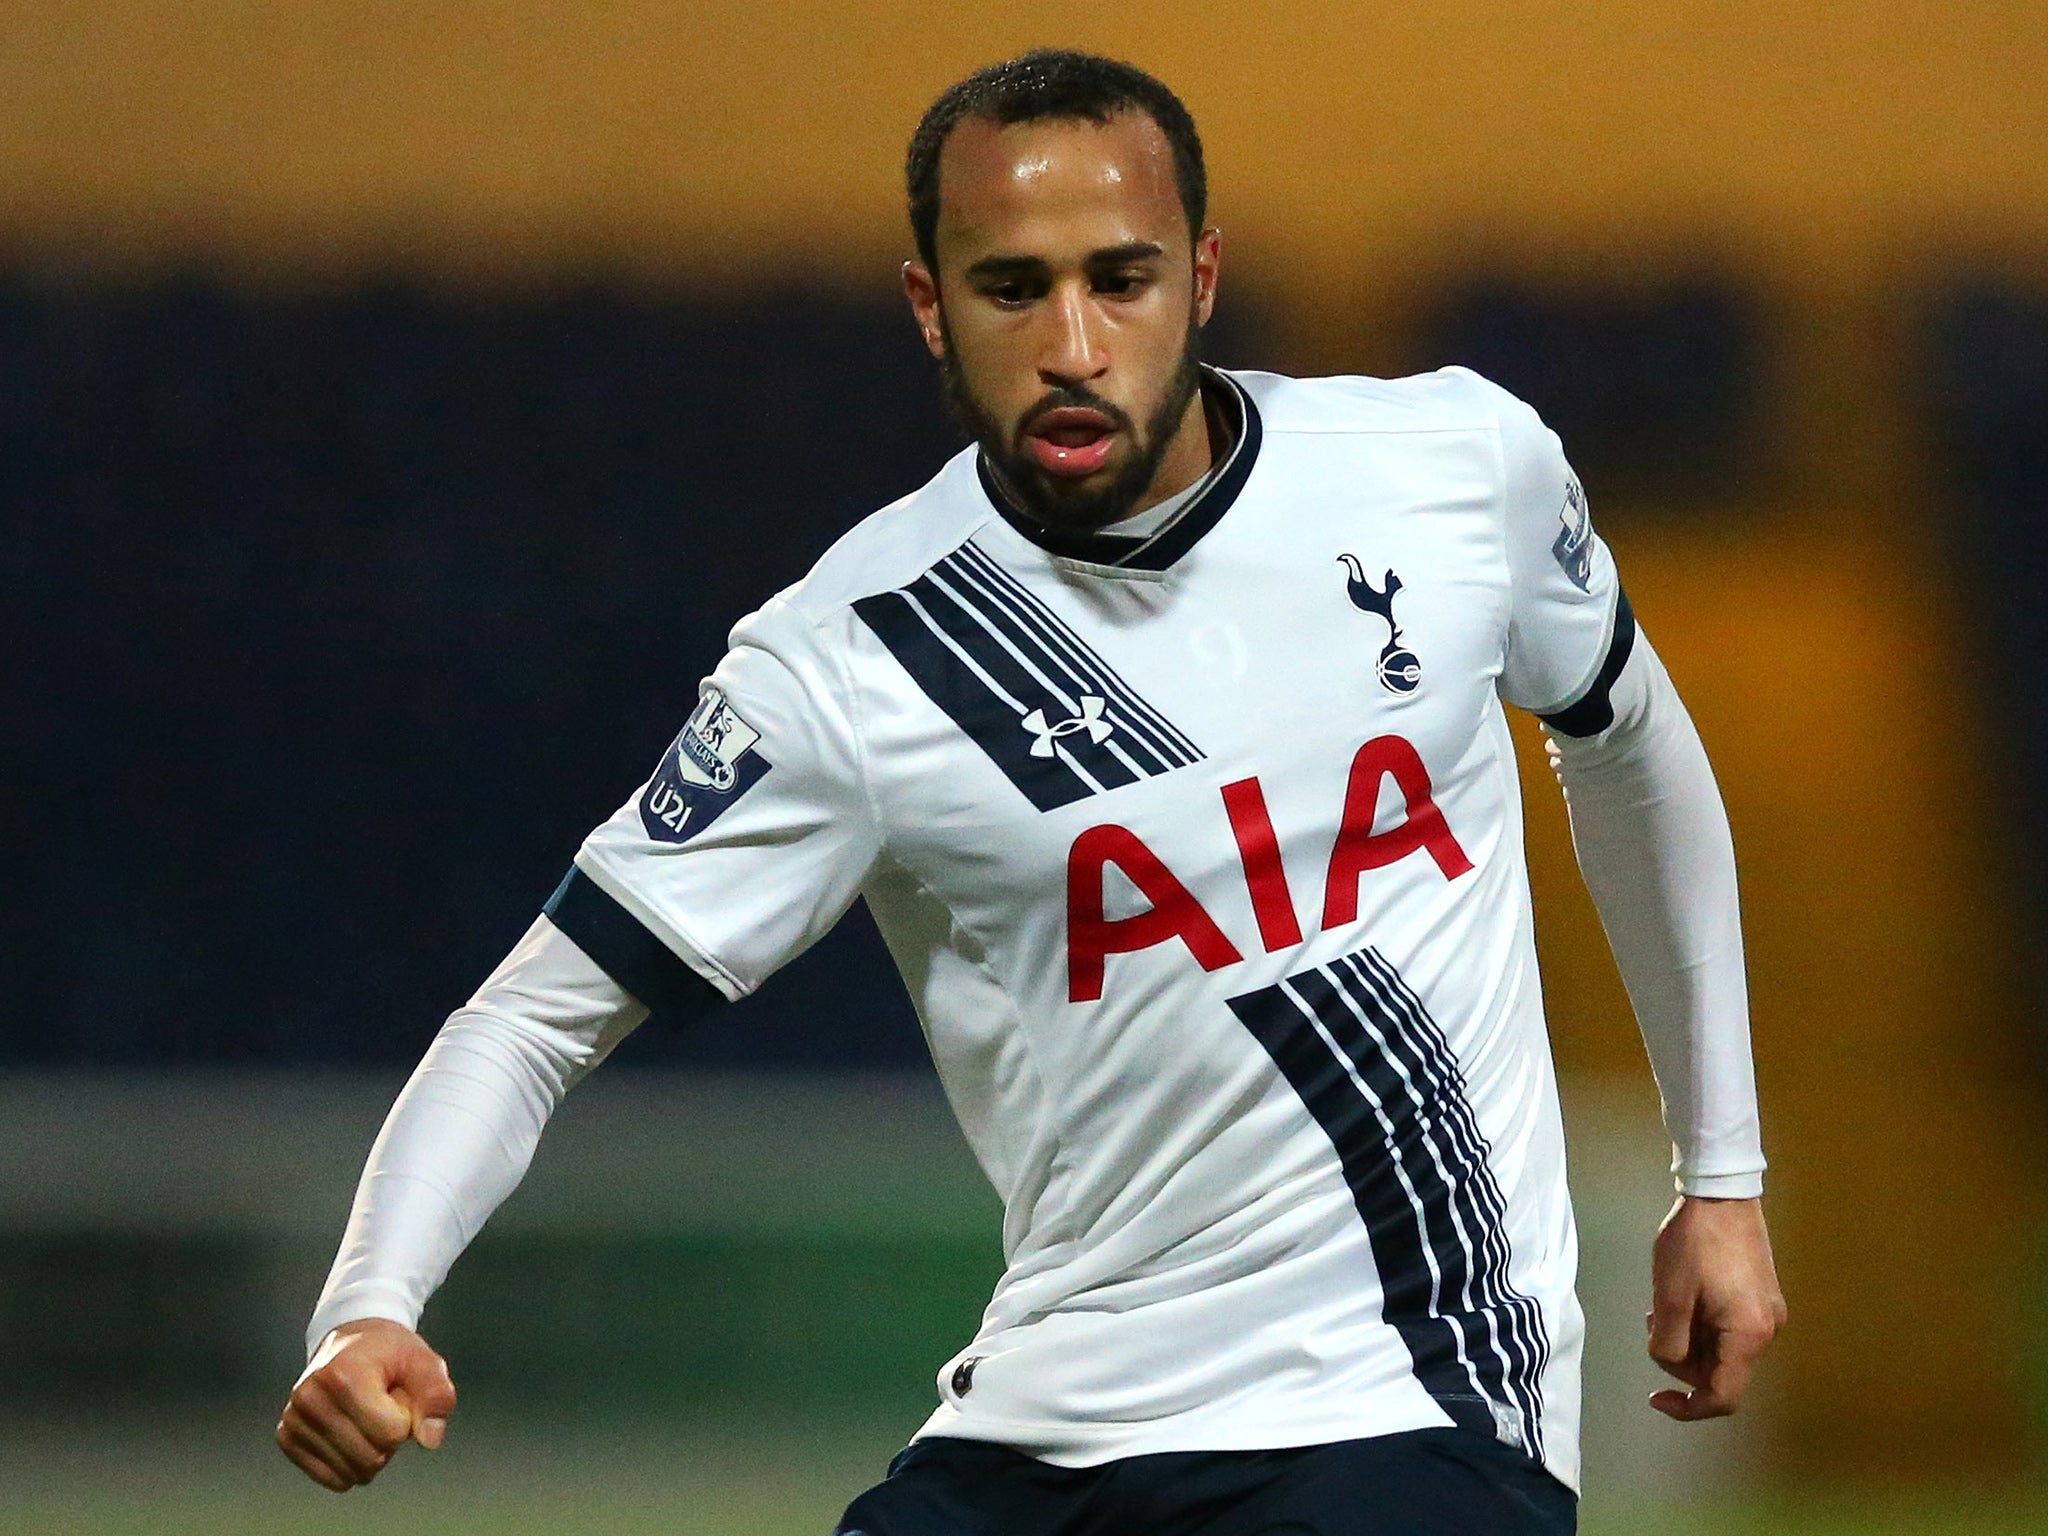 Tottenham Hotspur winger Andros Townsend is on the verge of a move to Newcastle United